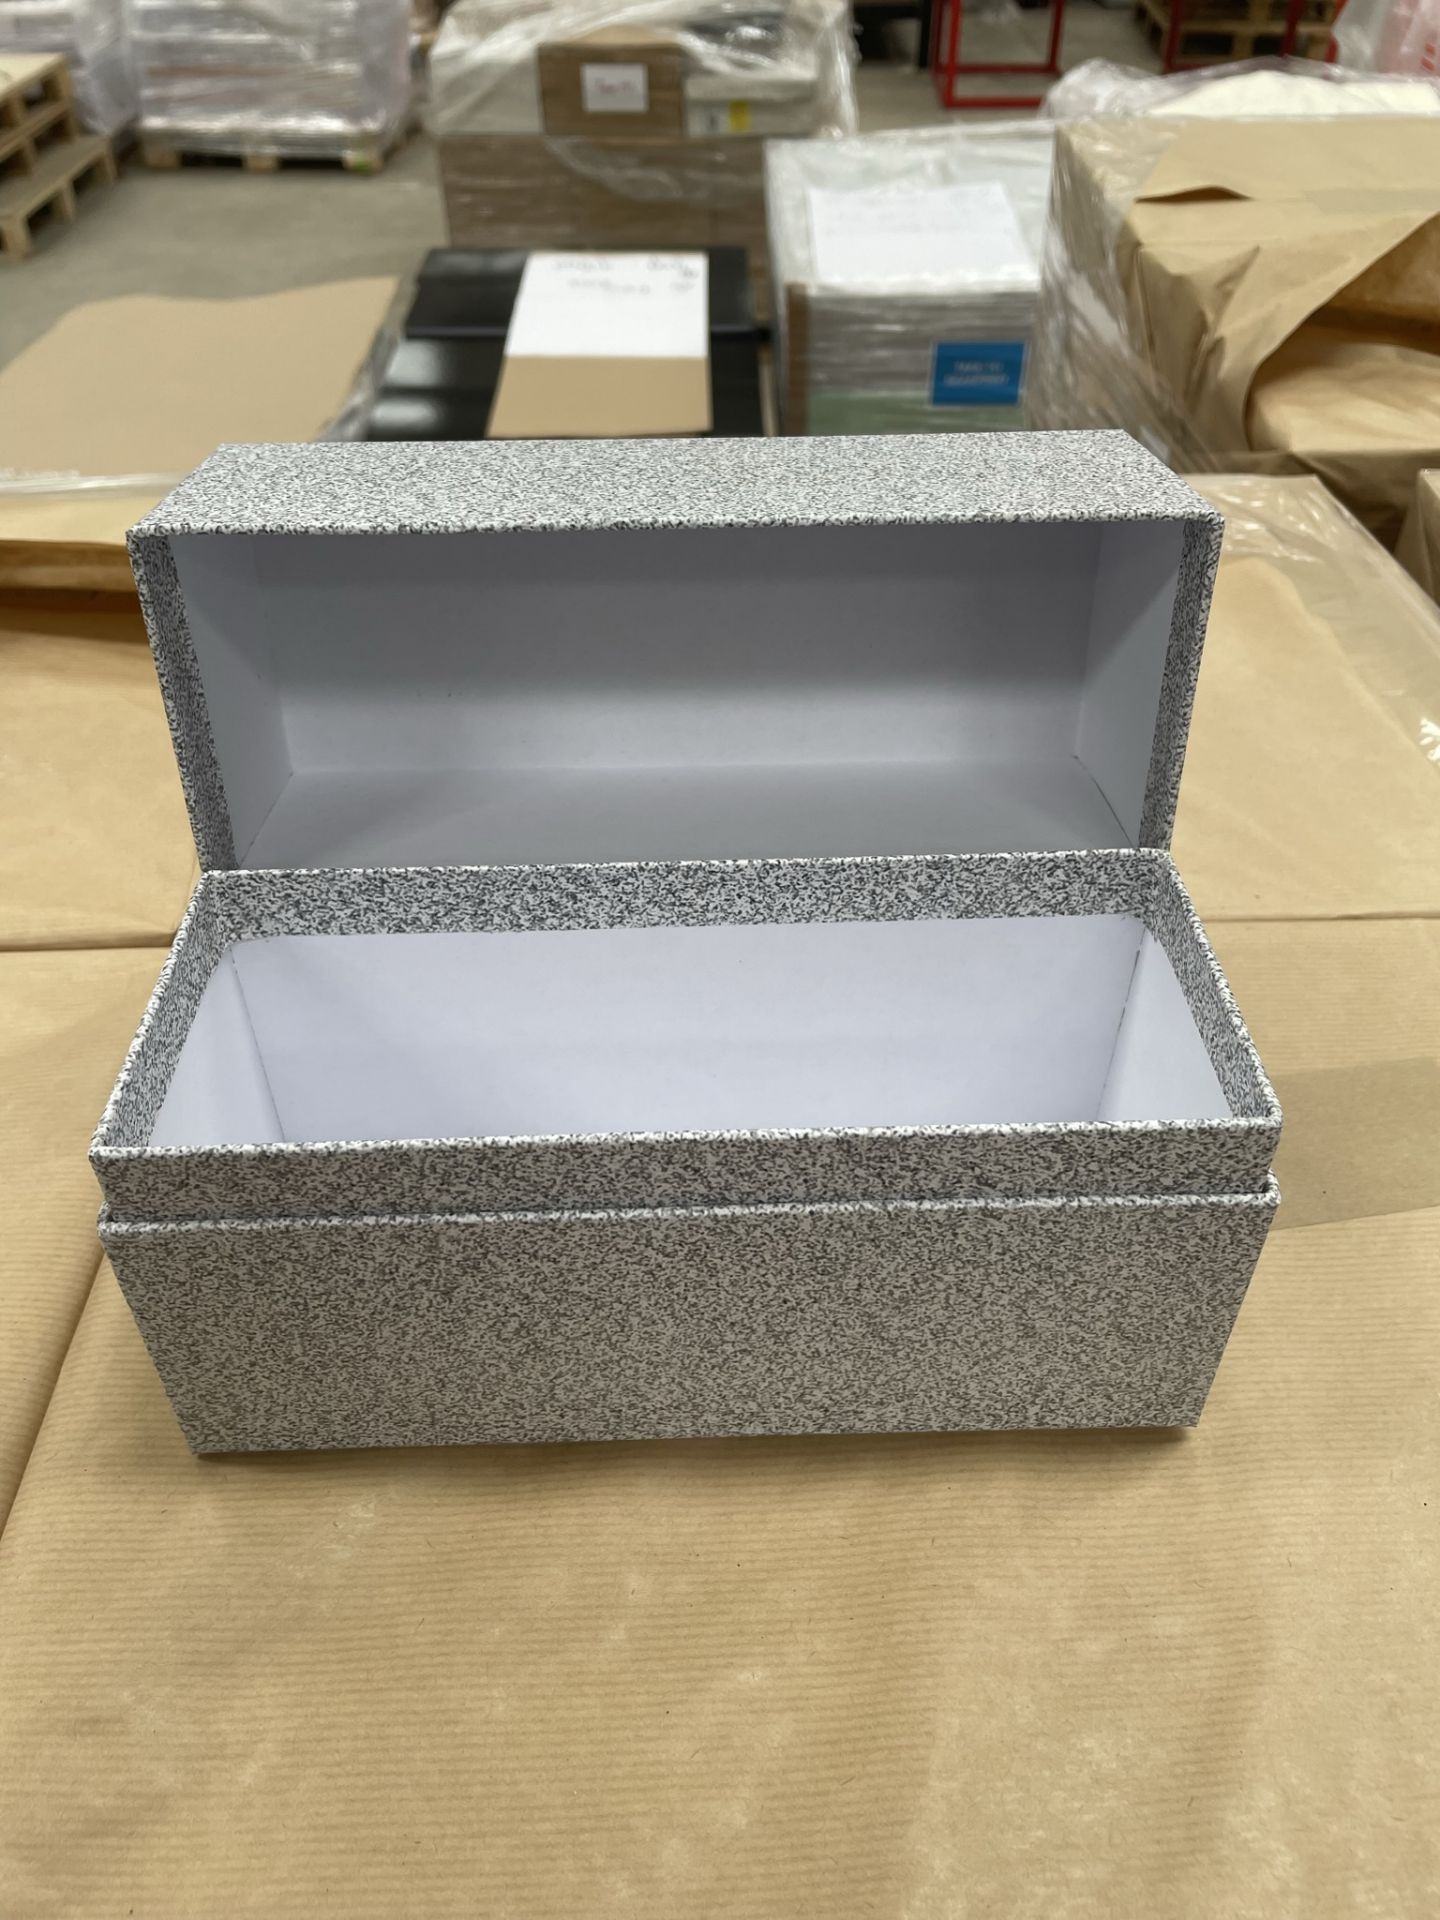 Approximately 200 x Quirepale Customer Record Boxes in Grey - Image 2 of 6